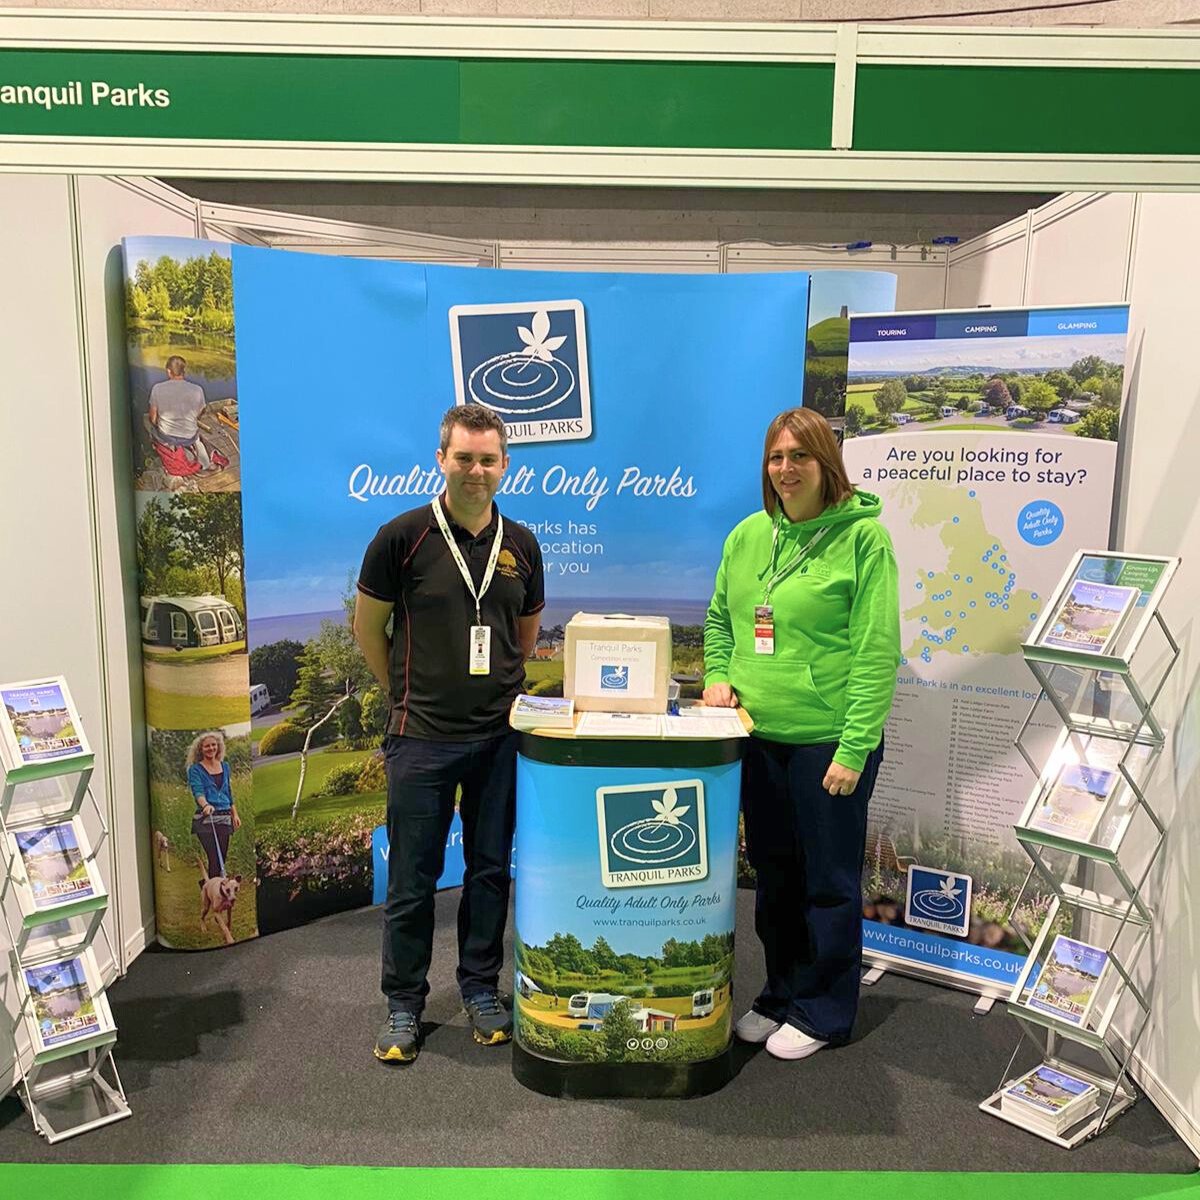 Caravan Camping & Motorhome Show Day 2 and our fantastic volunteers today are: ❤️ Craig from @Eyekettlebylake 👏 & ❤️ Louise from @SomersWoodCP👏 🤗 Stop by to pick up a brochure, enter our prize draw + find out about peaceful holiday parks just for adults. @CaravanCampShow